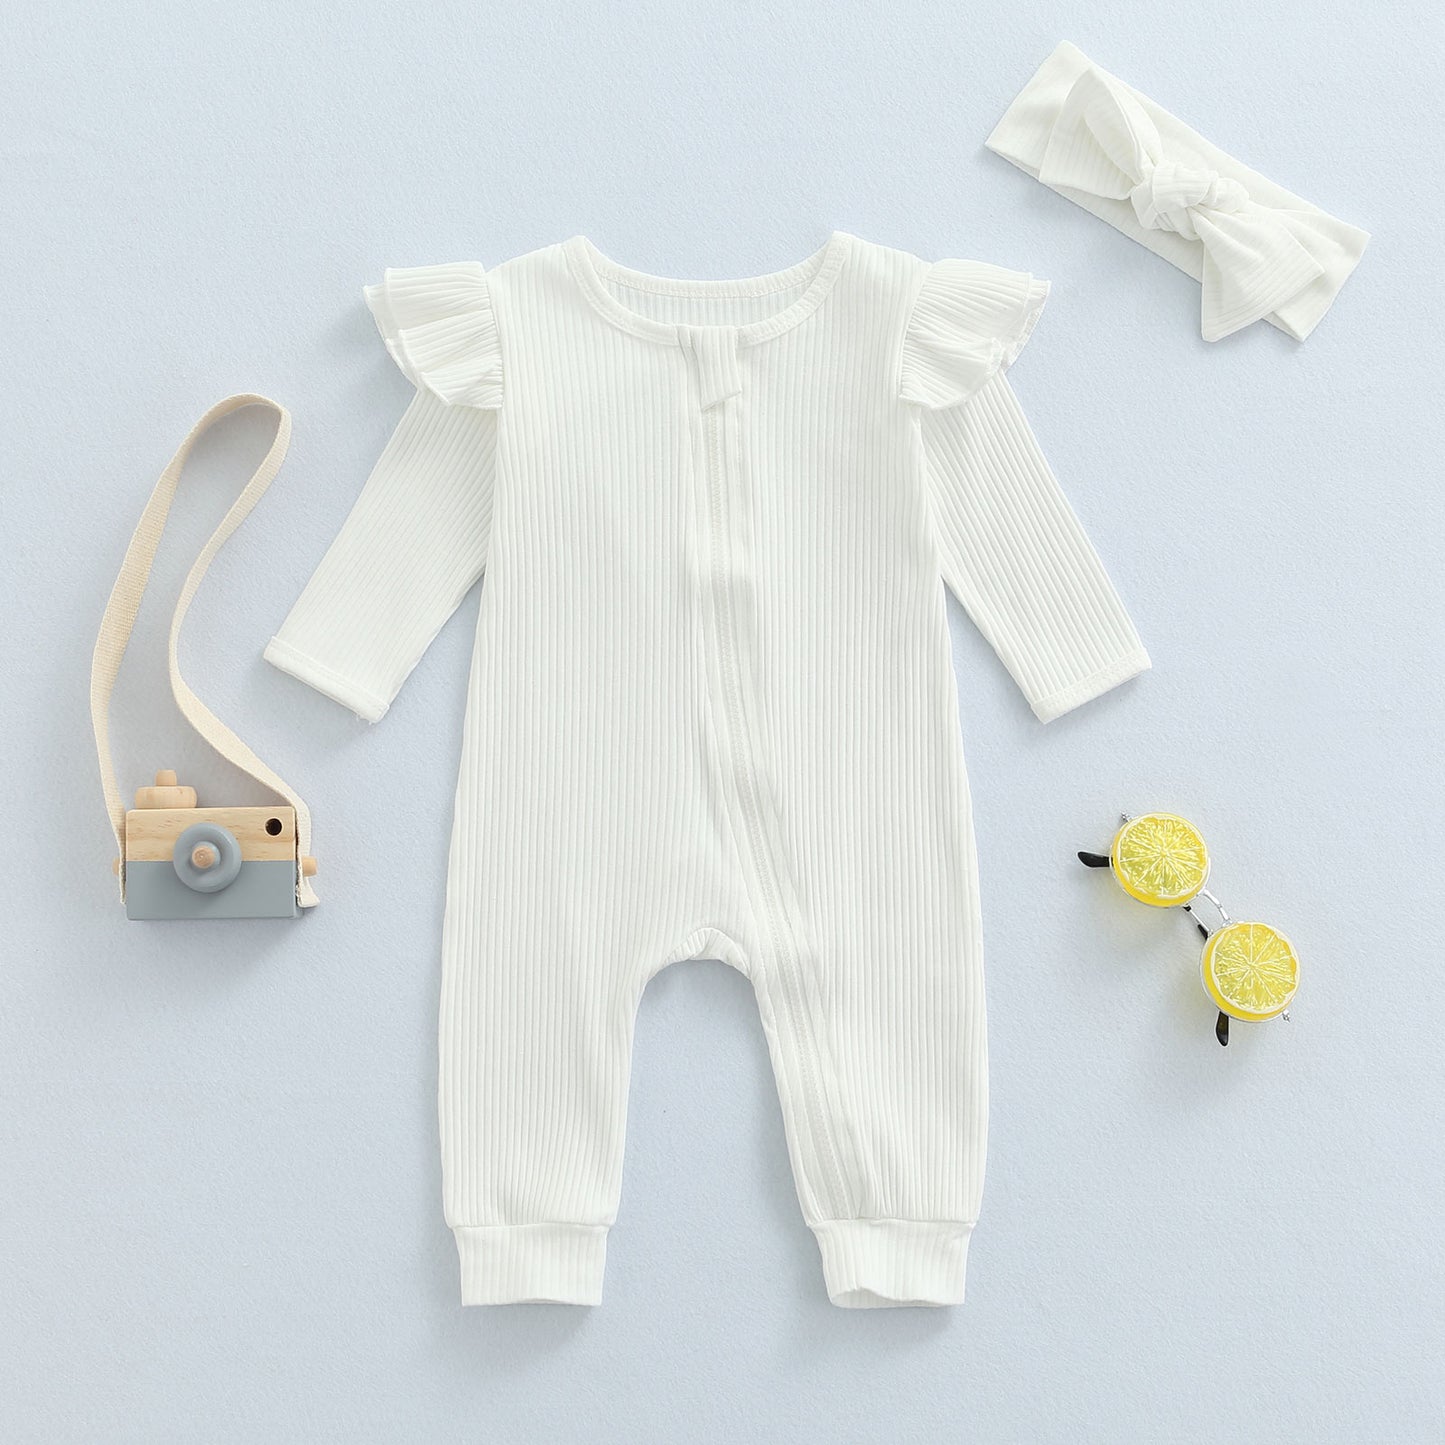 Ruffle shoulders Jumpsuit With Bow Headband